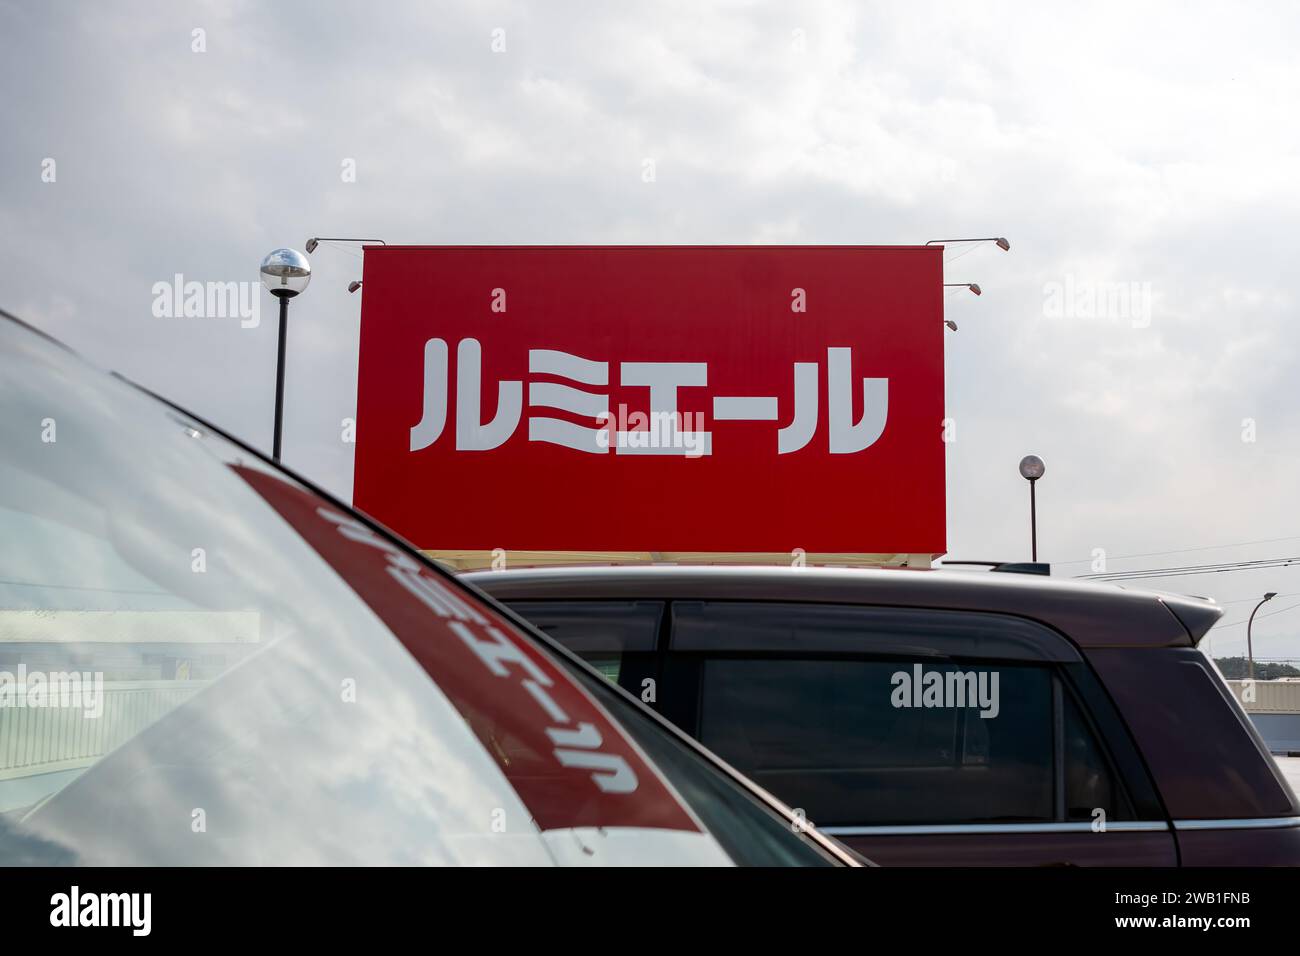 Lumiere supermarket sign from the parking lot in Japan. Stock Photo